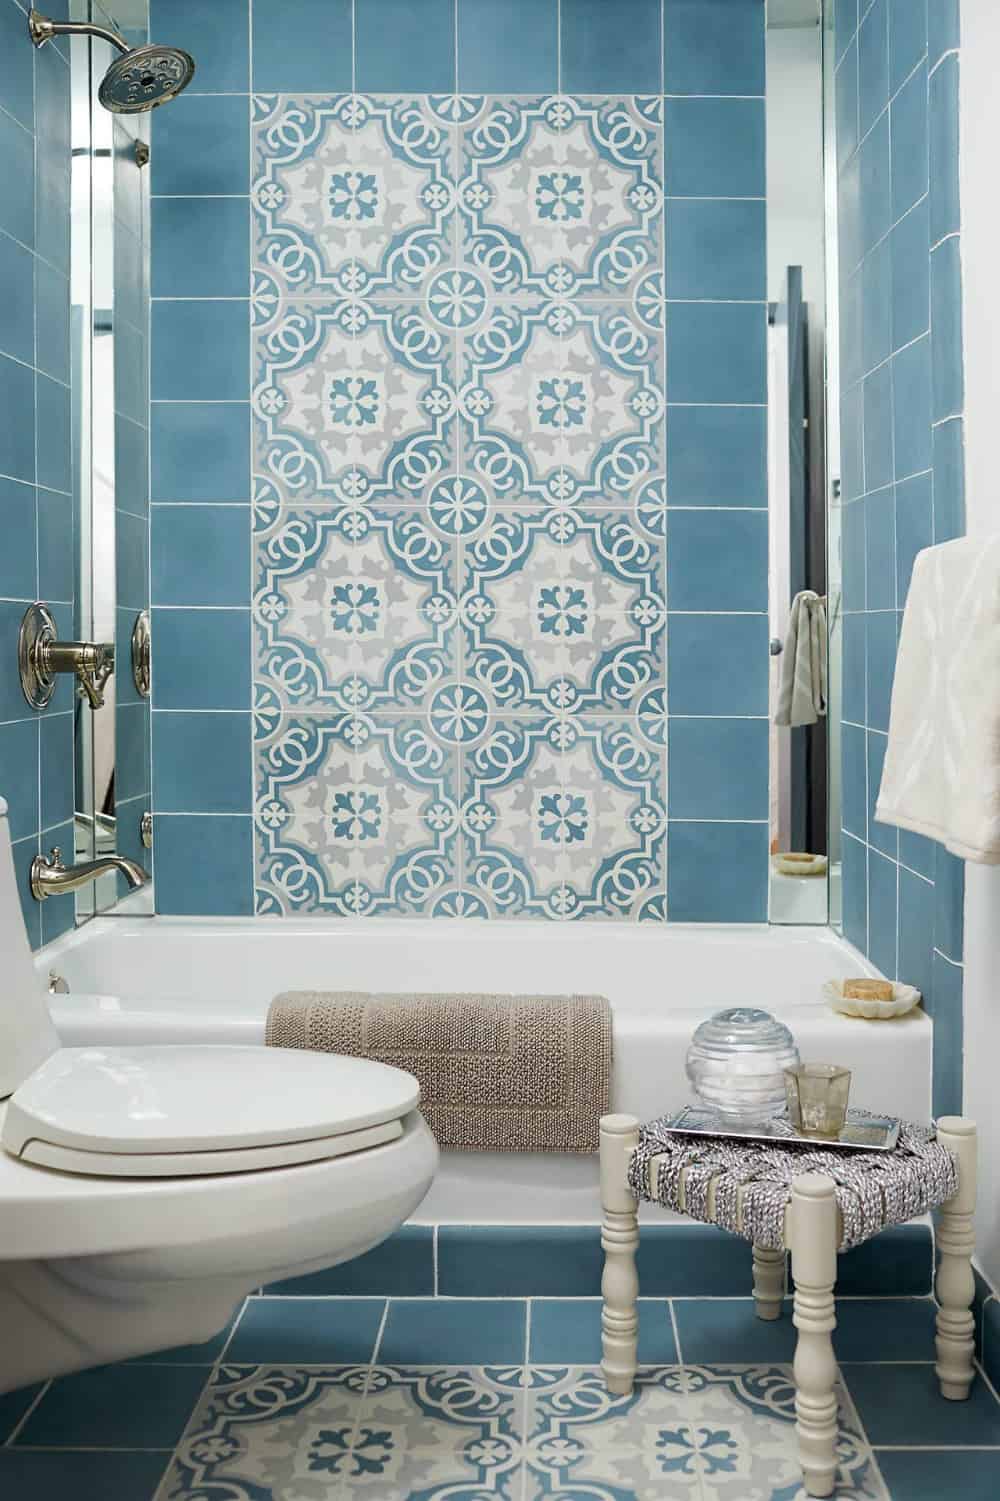 Small bathroom with Moroccan flair